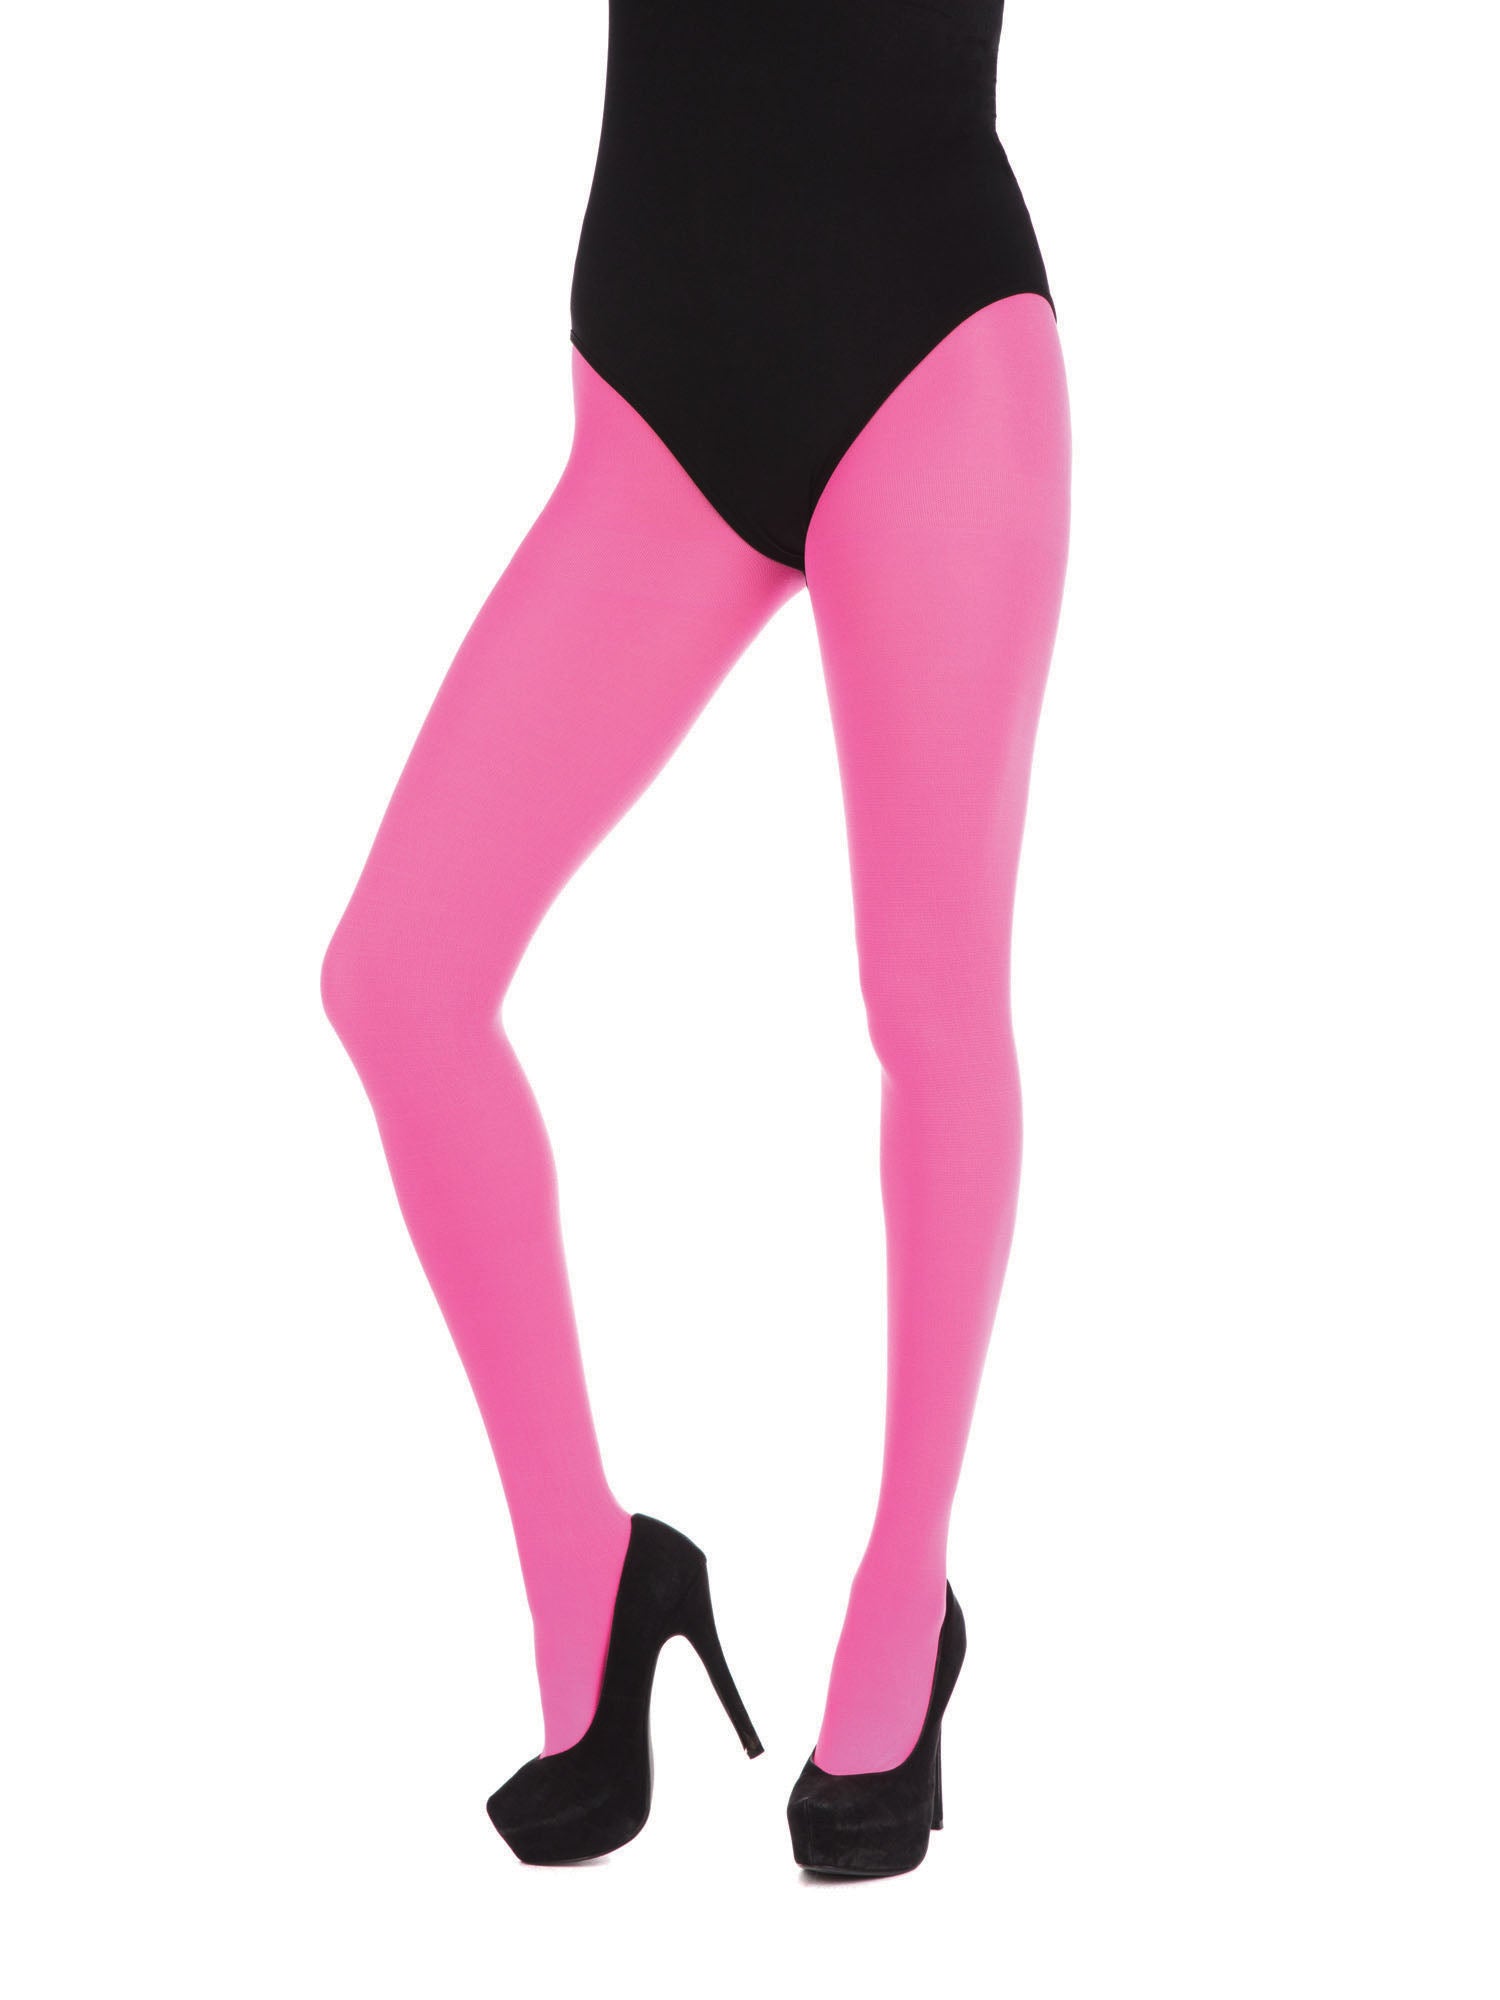 Tights, Pink, Generic, Accessories, One Size, Back